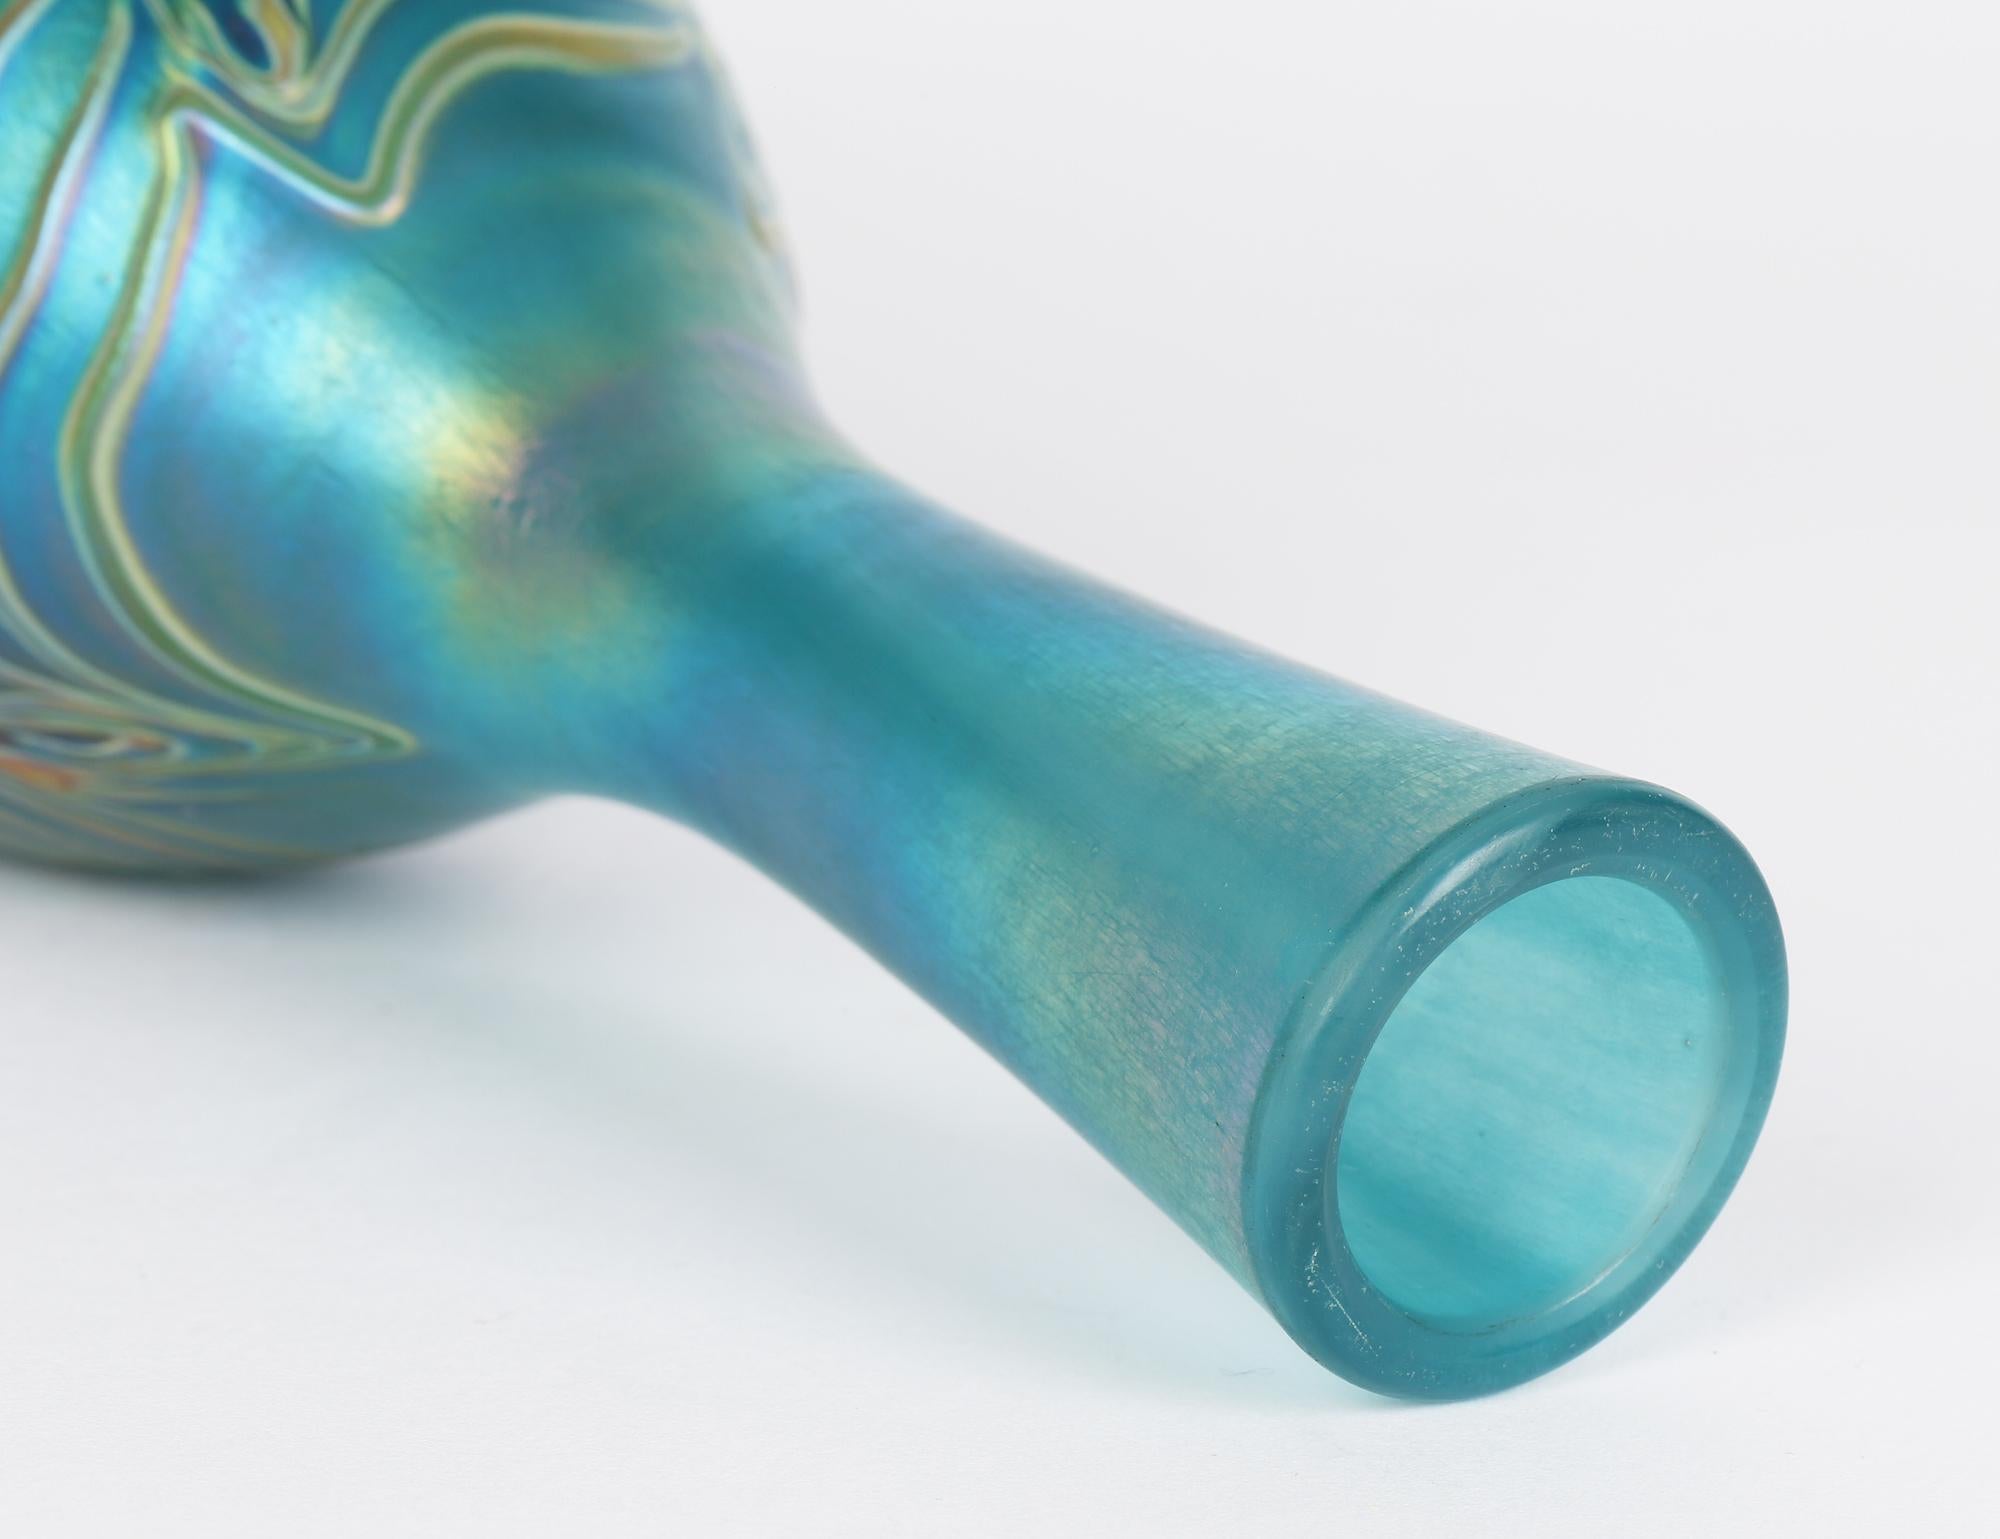 Blown Glass Iridescent Blue Bottle Shaped Art Glass Vase with Peacock Feather Trailing For Sale